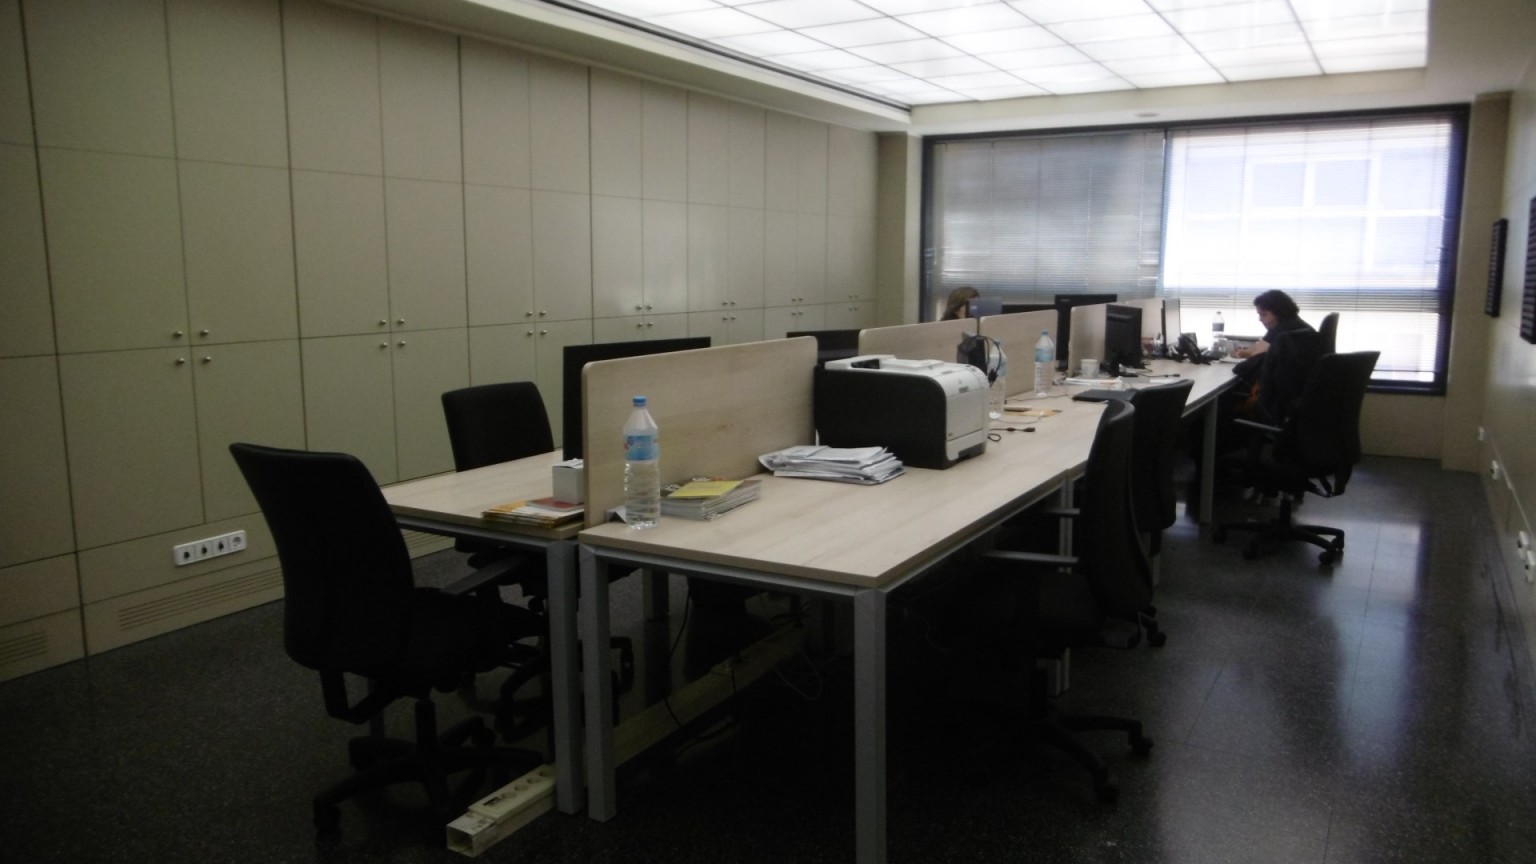 Luminous professional office for sale - Located in the "SINDICATS" building